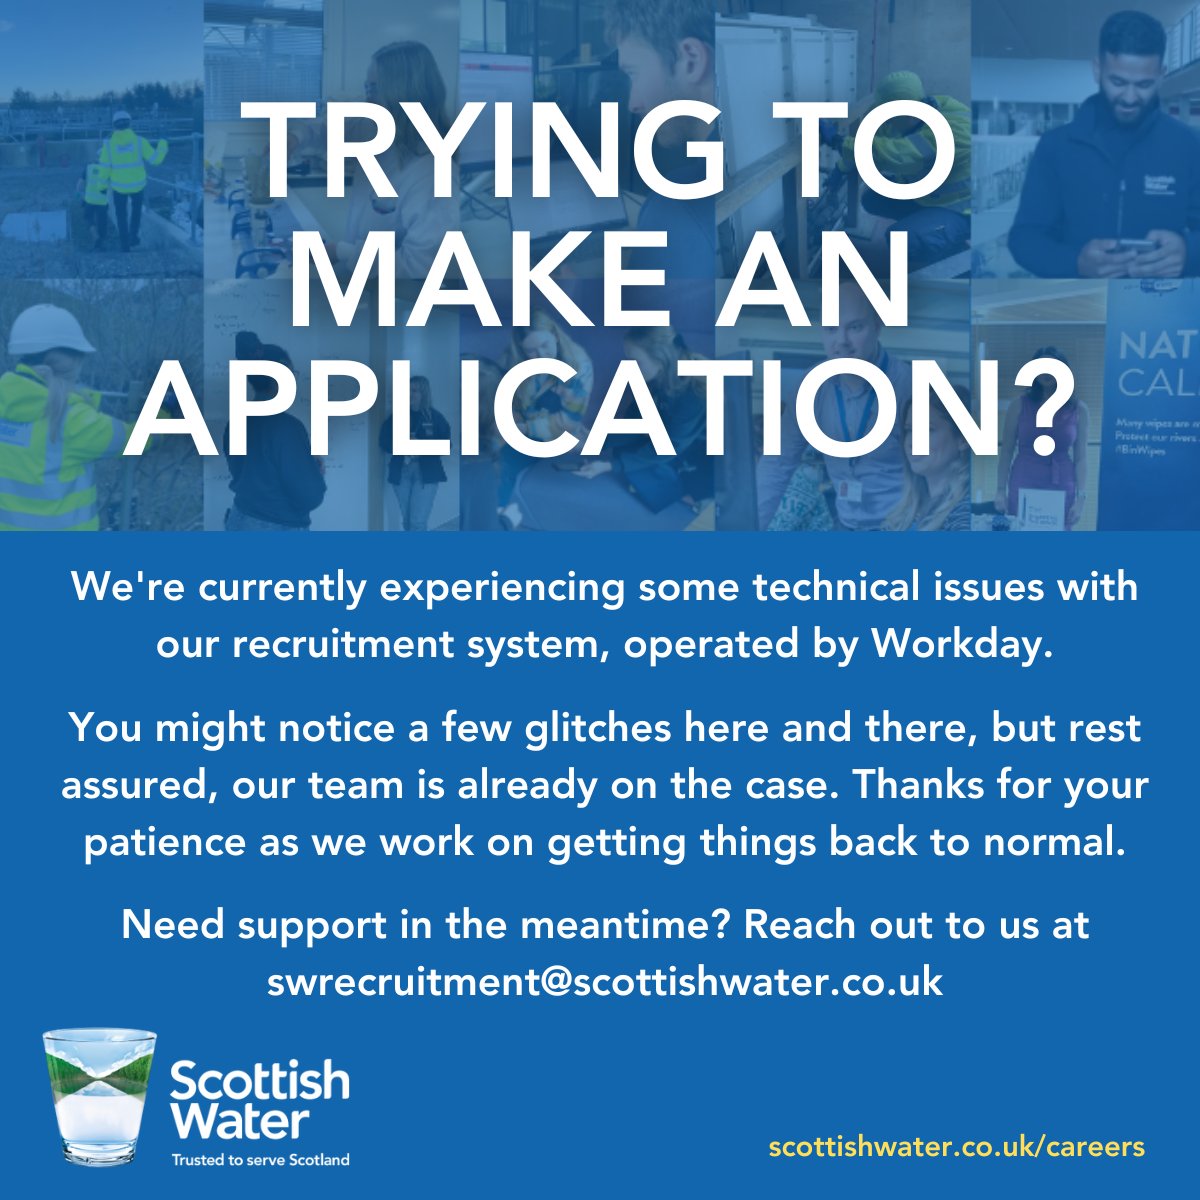 Heads up! Our recruitment system's facing tech issues. If you're applying, you might notice glitches. Hang tight, we're fixing it! Need support? Email us at swrecruitment@scottishwater.co.uk. Thanks for your patience! #TechnicalIssues #RecruitmentSupport